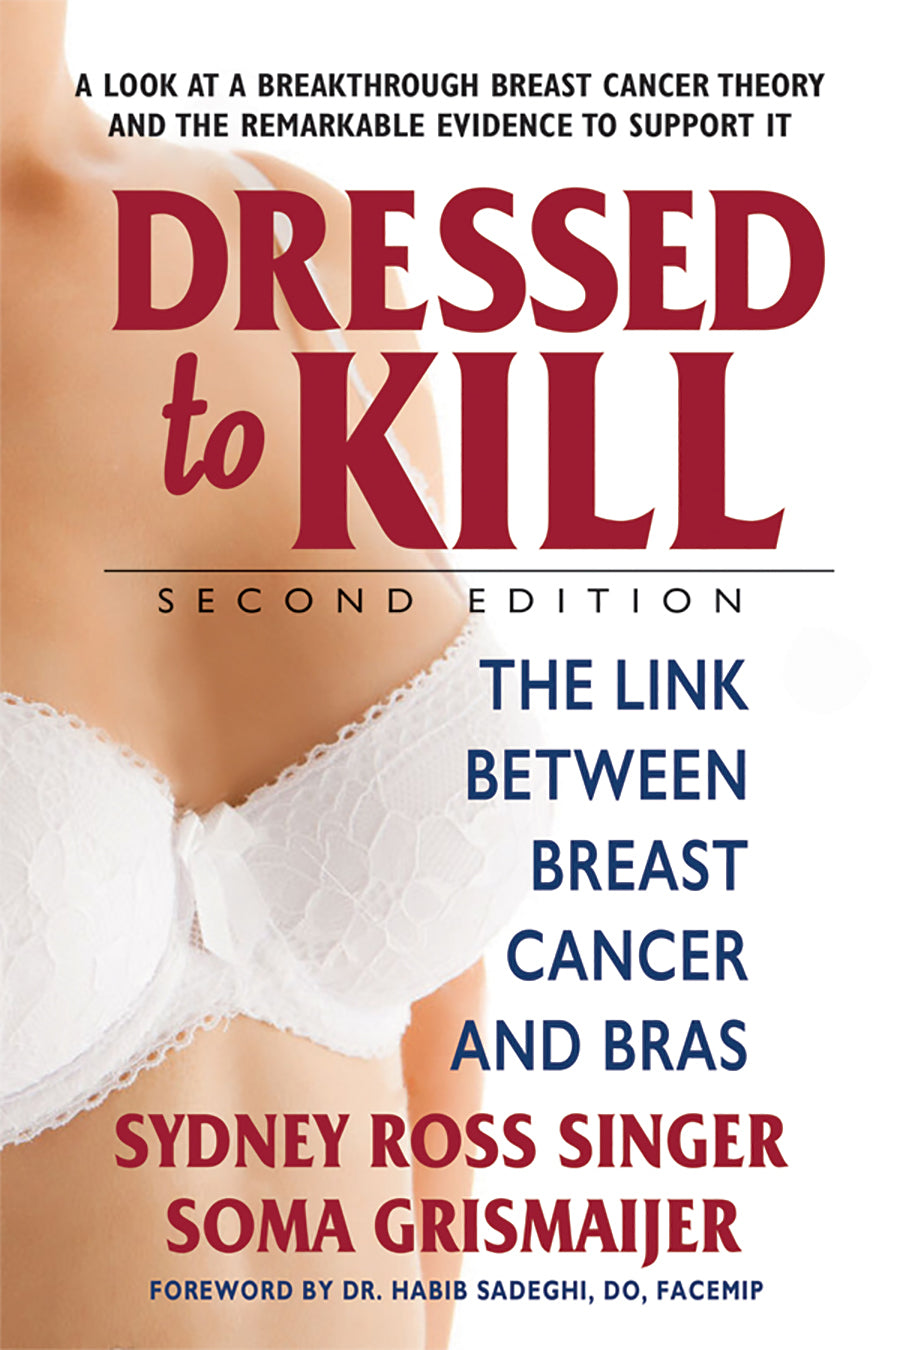 Dressed to Kill—Second Edition